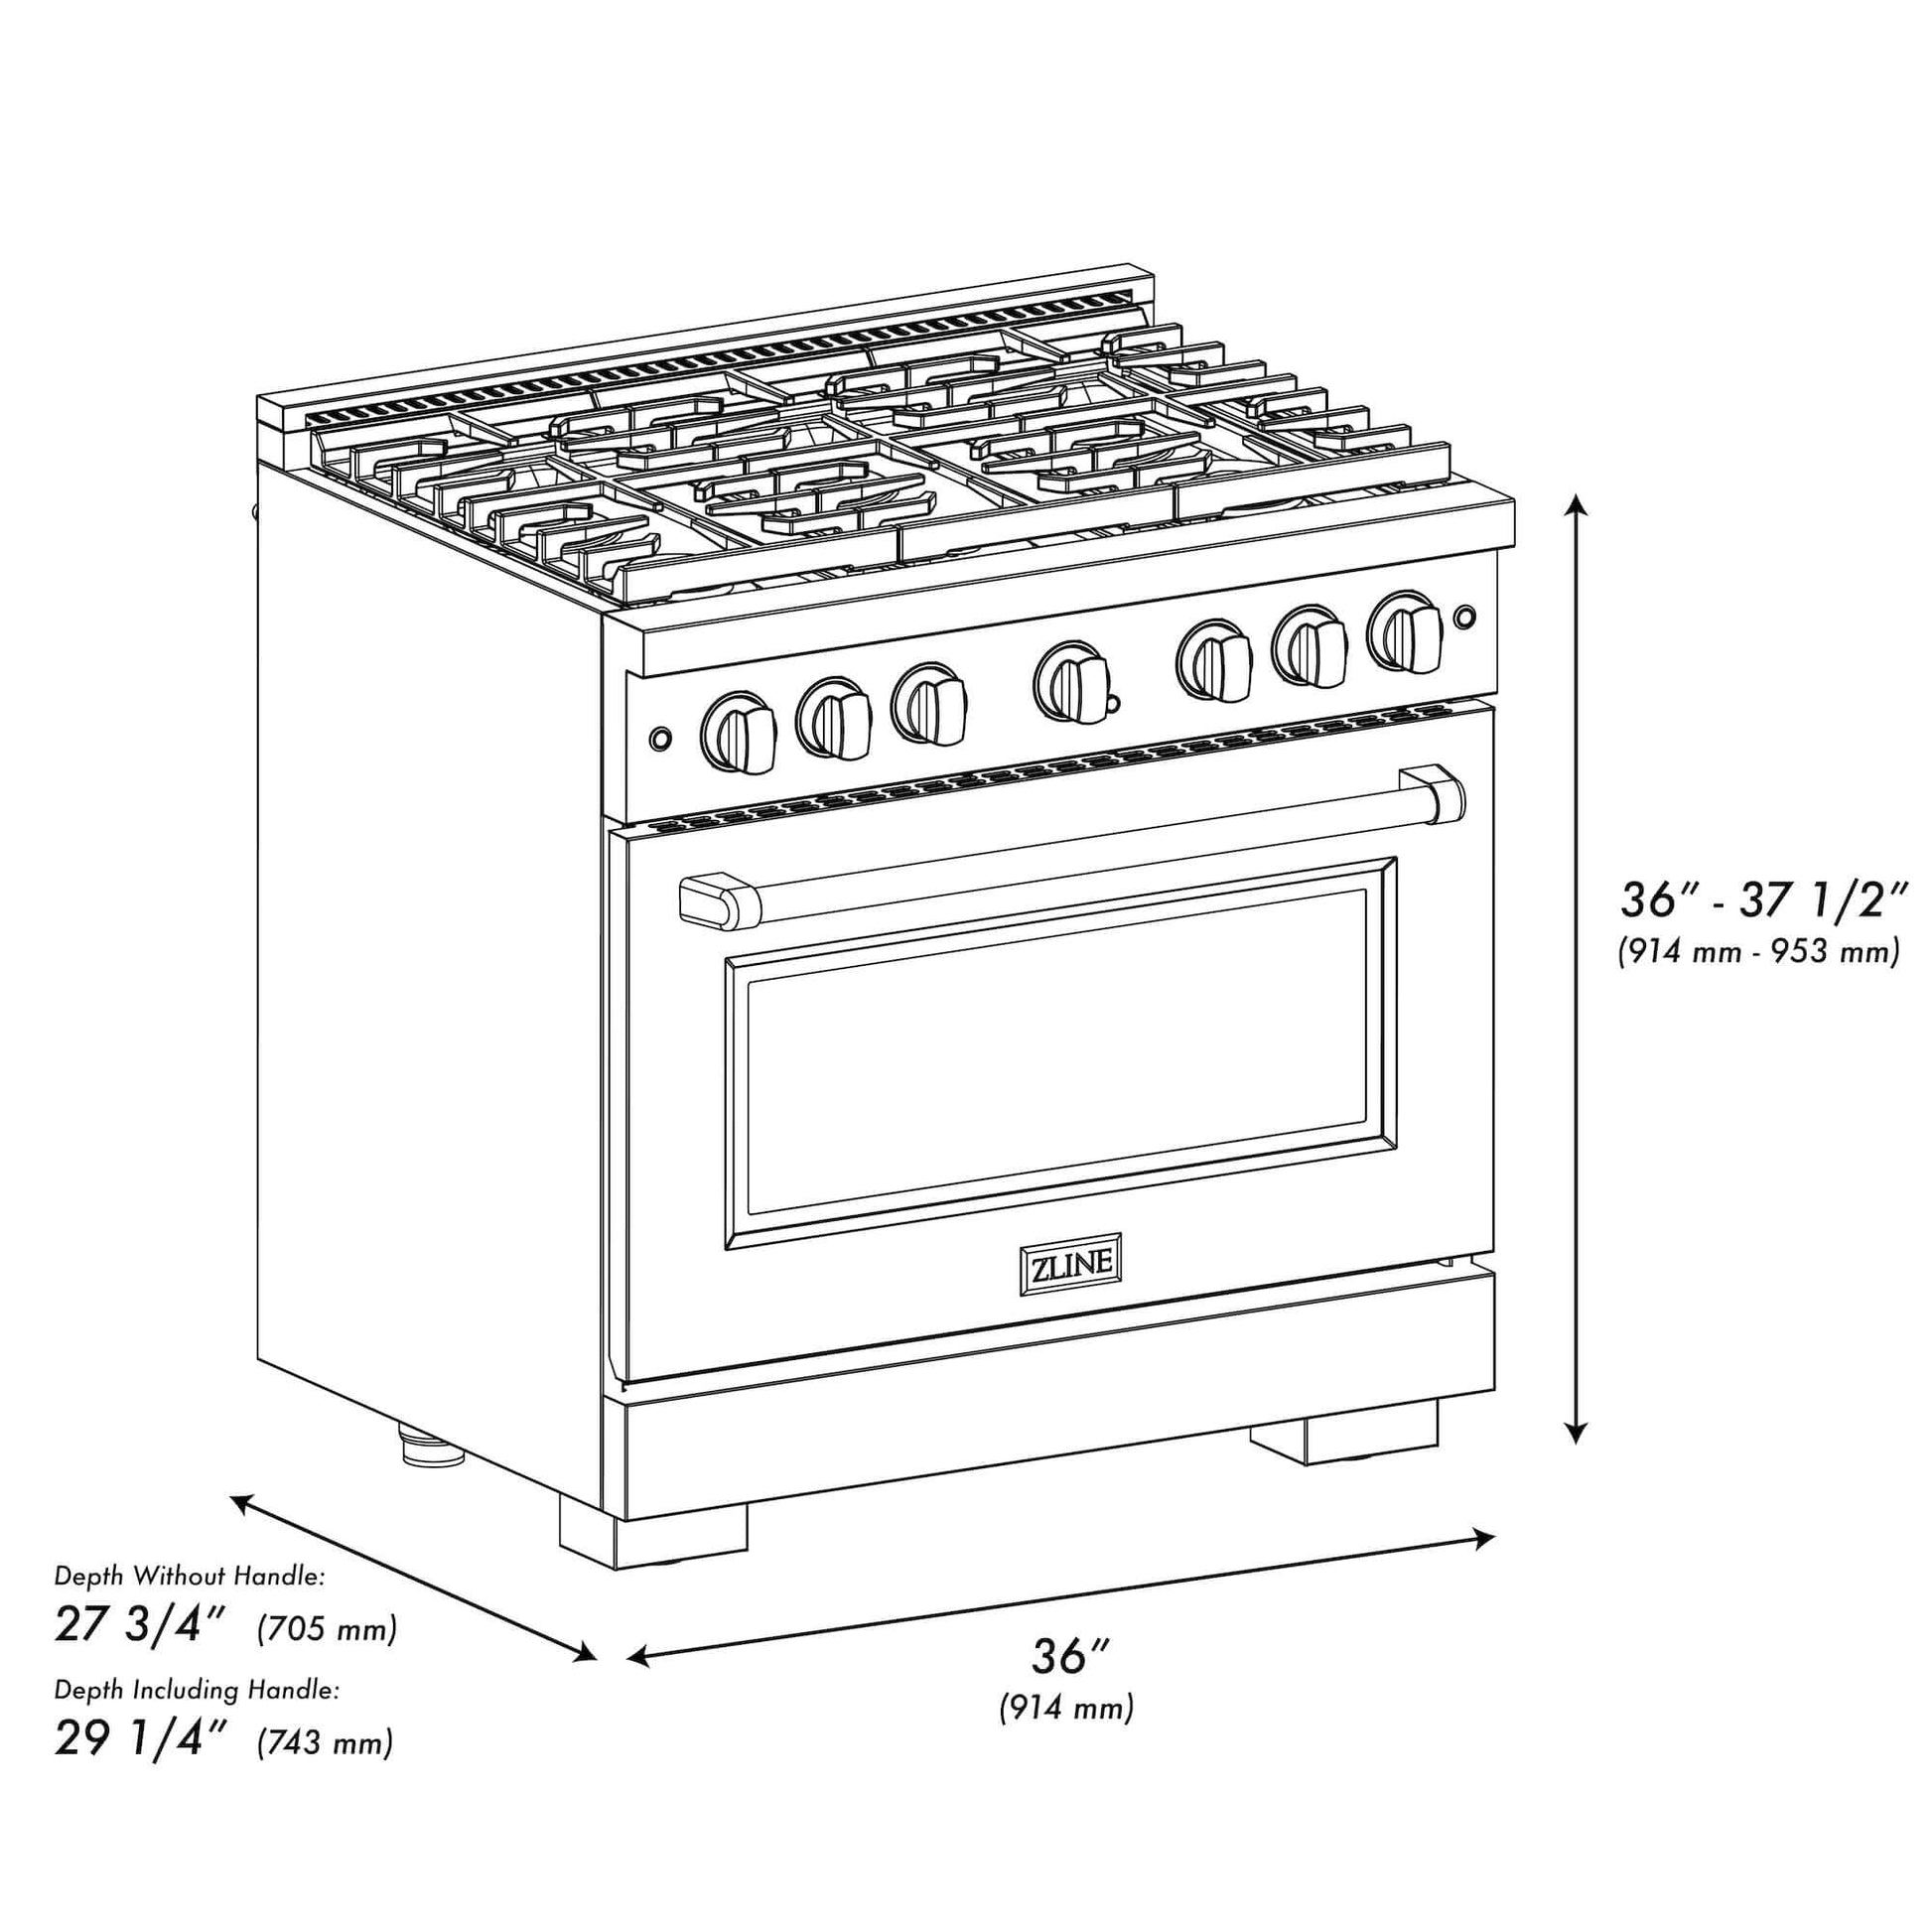 ZLINE 36 in. 5.2 cu. ft. 6 Burner Gas Range with Convection Gas Oven in Stainless Steel (SGR36) dimensional diagram.